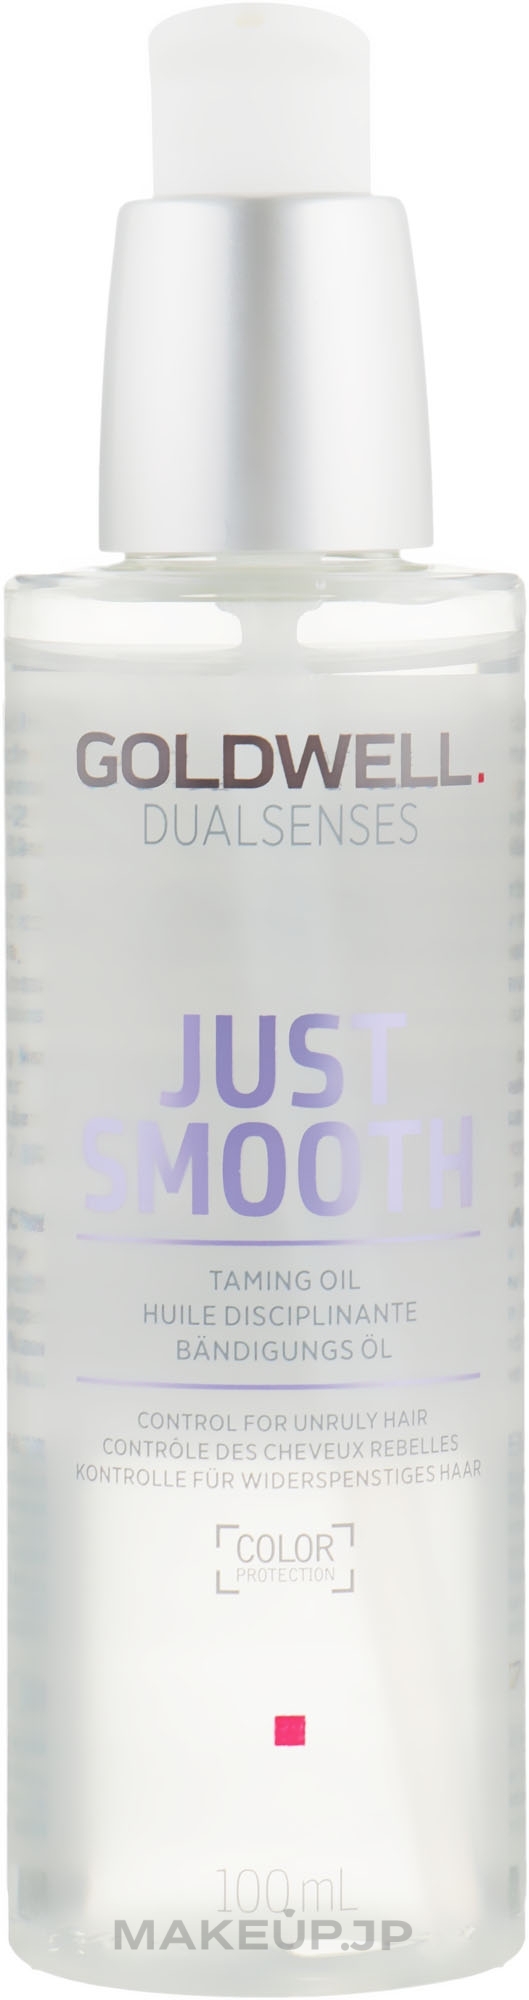 Unruly Hair Oil - Goldwell DualSenses Just Smooth Taming Oil — photo 100 ml